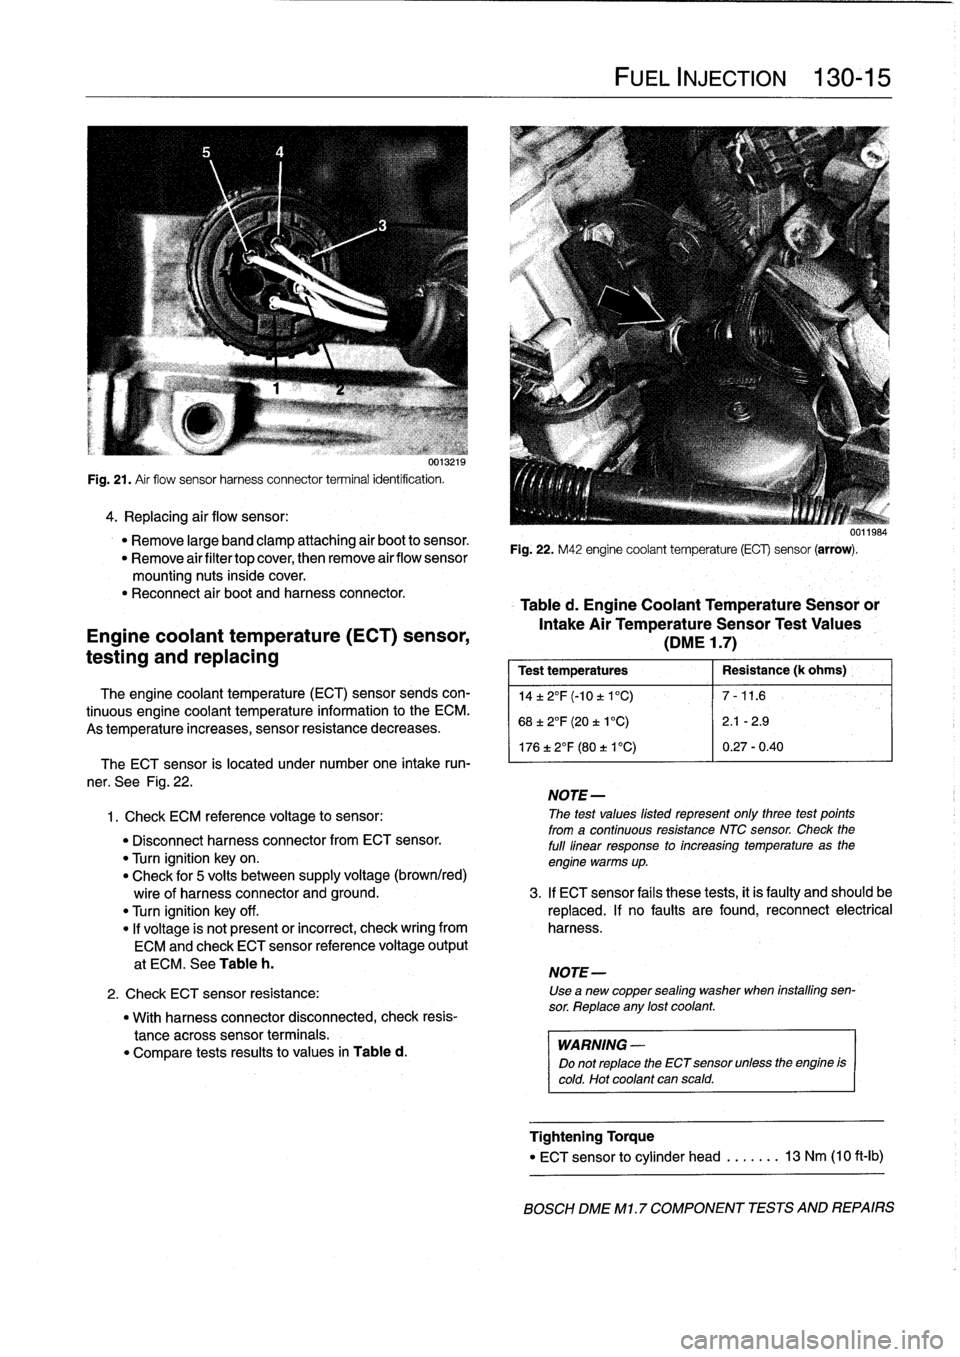 BMW 318i 1997 E36 Owners Manual u0
I
.[
Ia

Fig
.
21
.
Air
flow
sensor
harness
connector
terminal
identification
.

4
.
Replacing
air
flow
sensor
:

"
Remove
large
band
clamp
attaching
air
boot
to
sensor
.

"
Remove
airfiltertop
cov